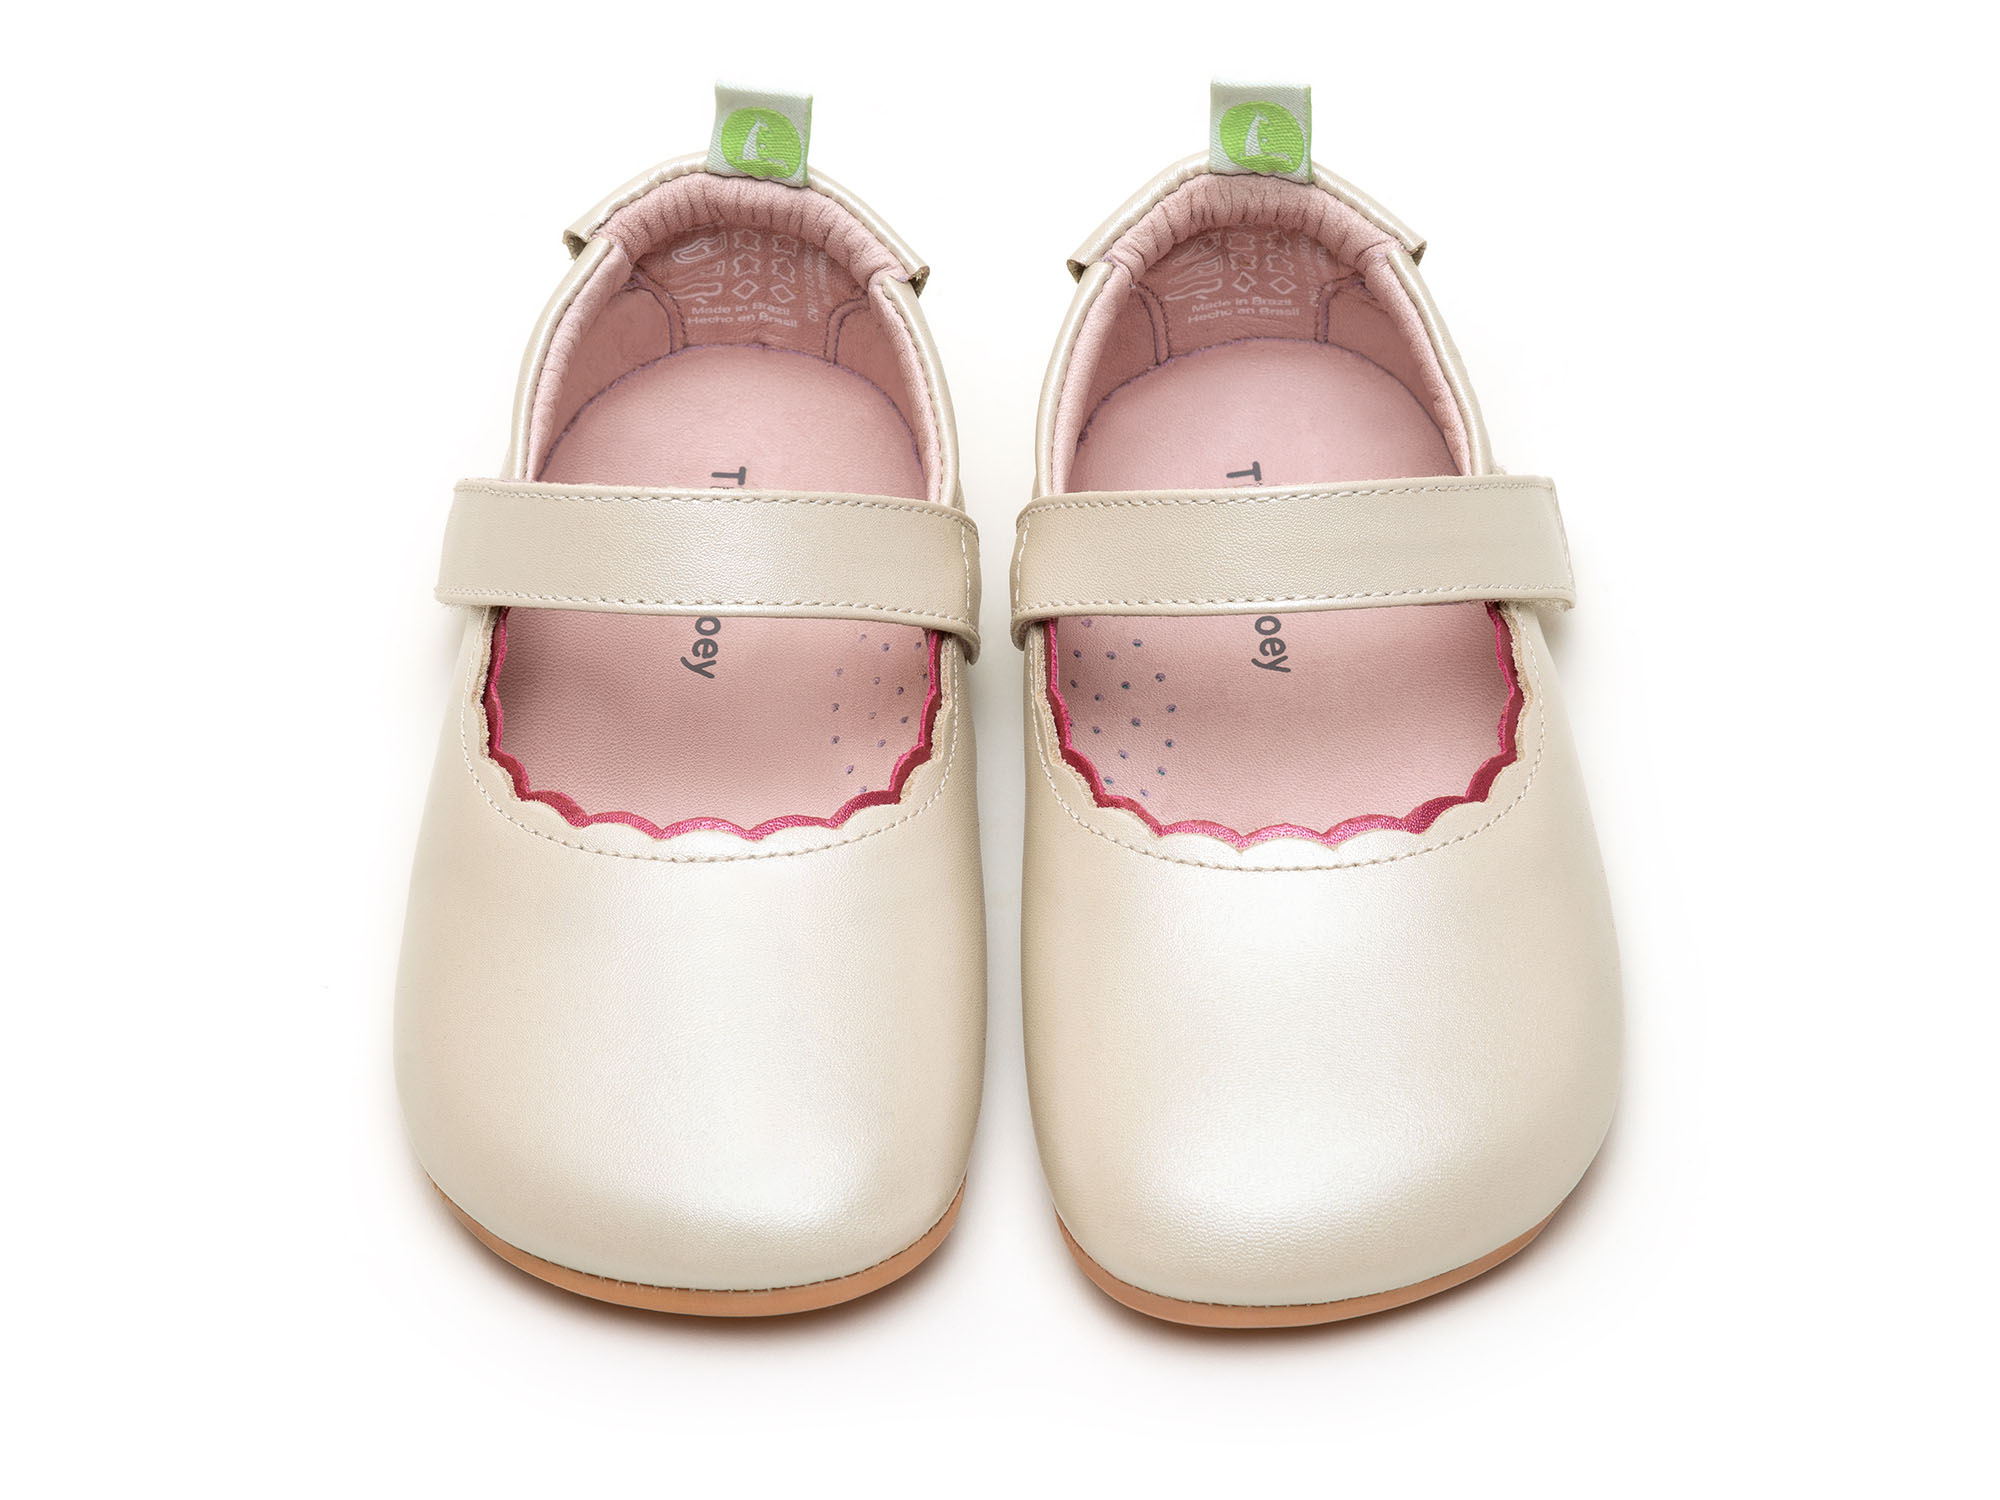 UP & GO Mary Janes for Girls Roundy | Tip Toey Joey - Australia - 1